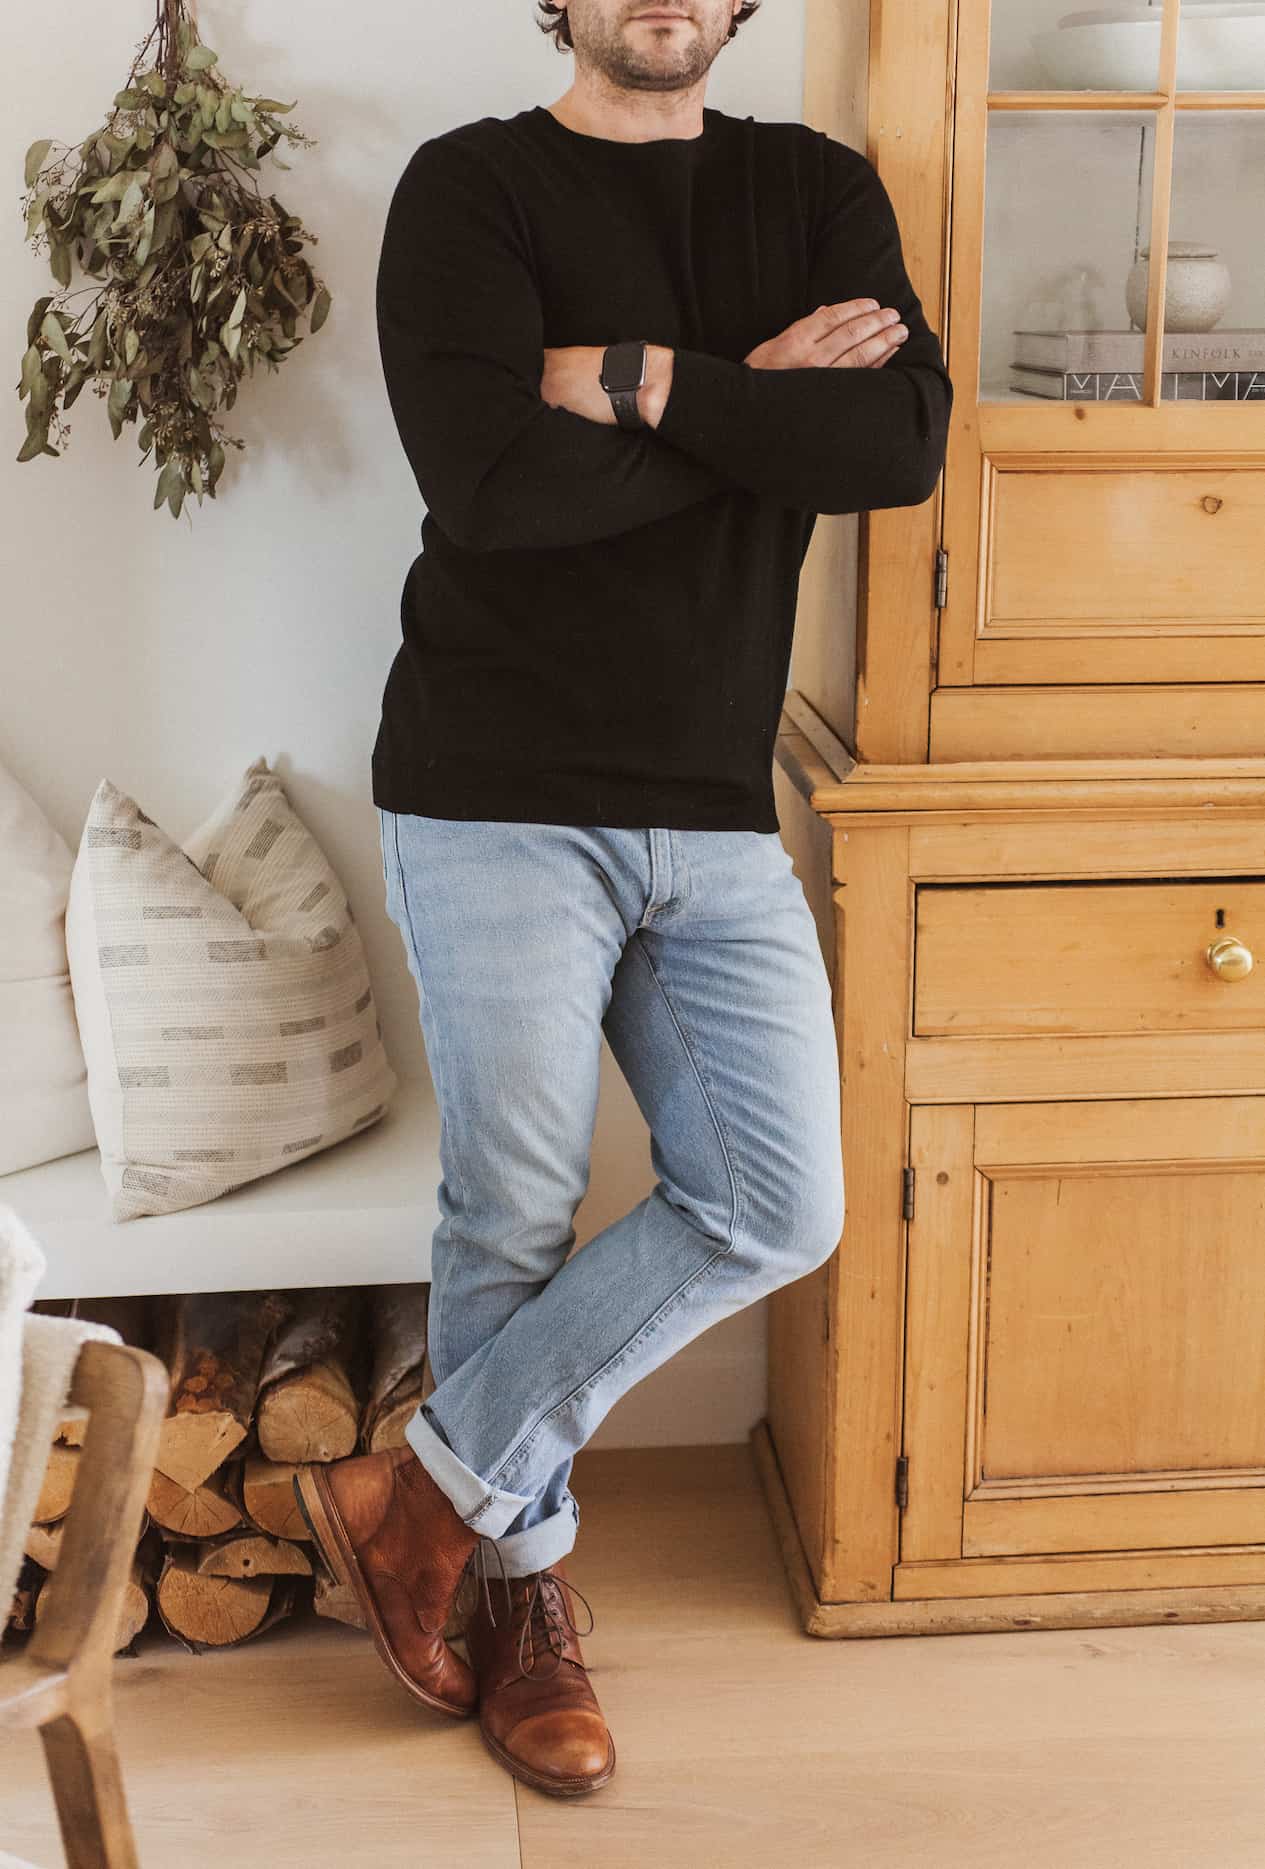 image of a man from the neck down standing against a wood cabinet wearing a black sweater, light blue jeans, and brown boots